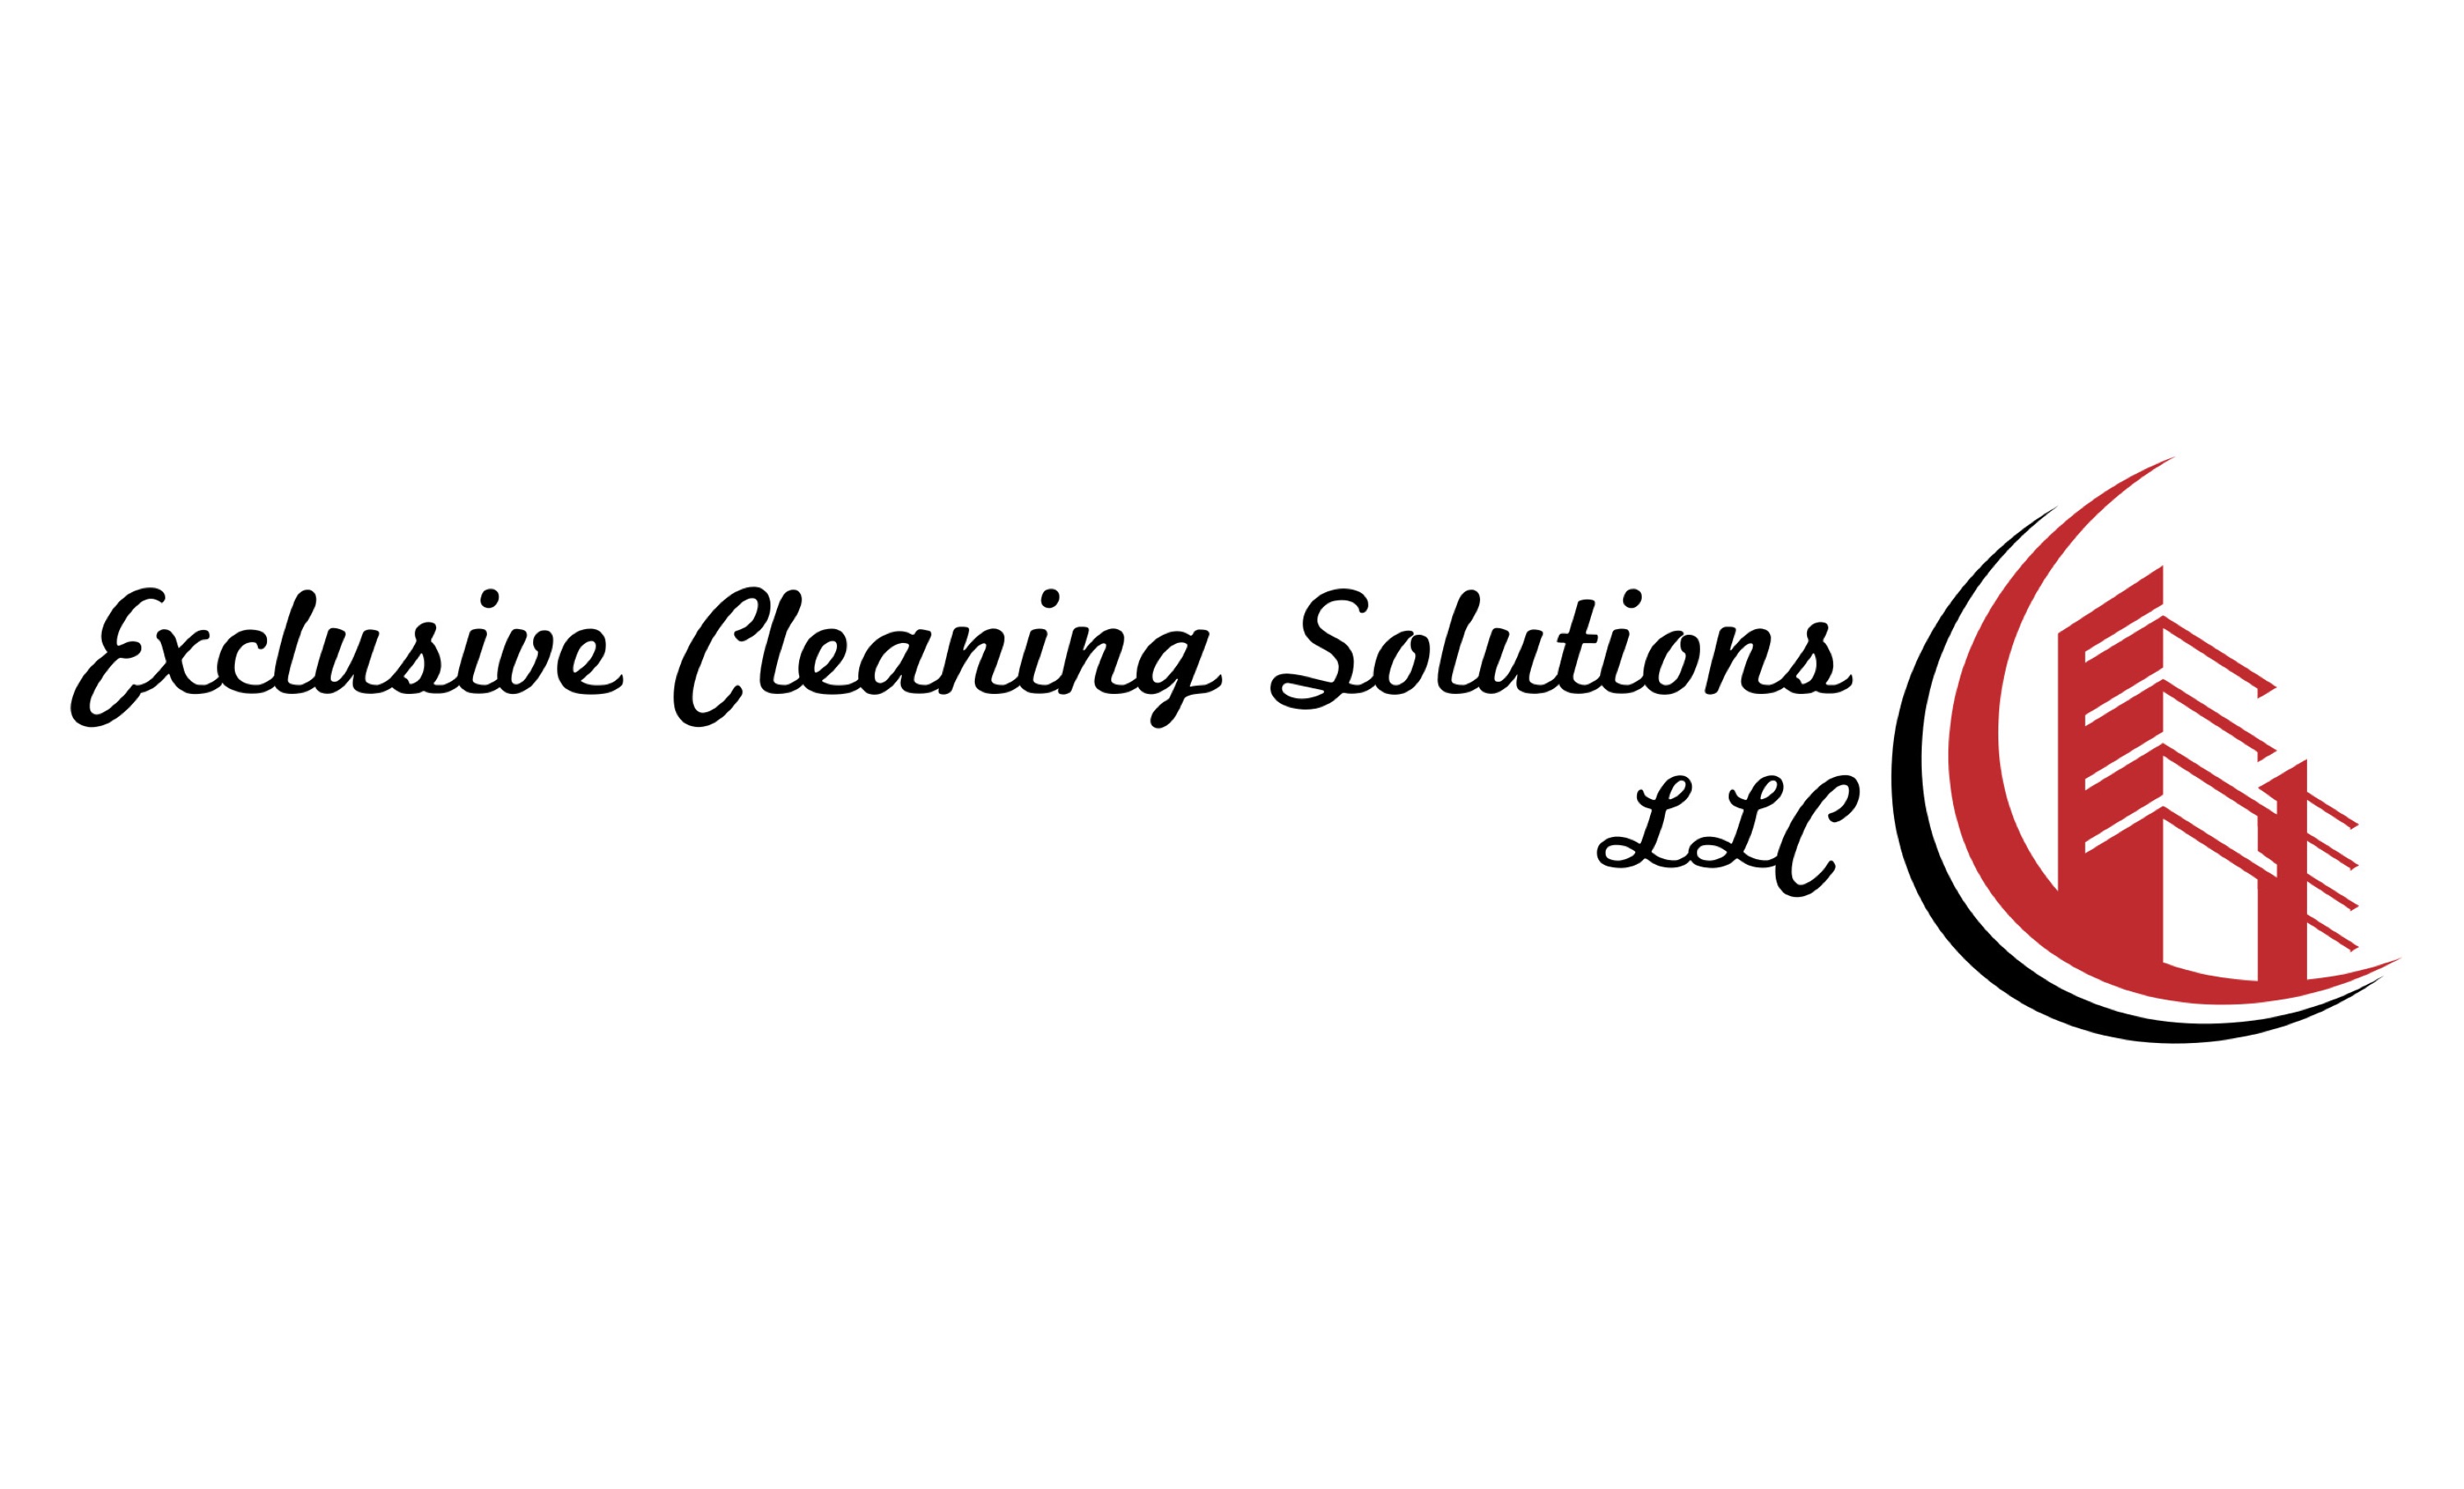 Exclusive Cleaning Solutions, LLC Logo